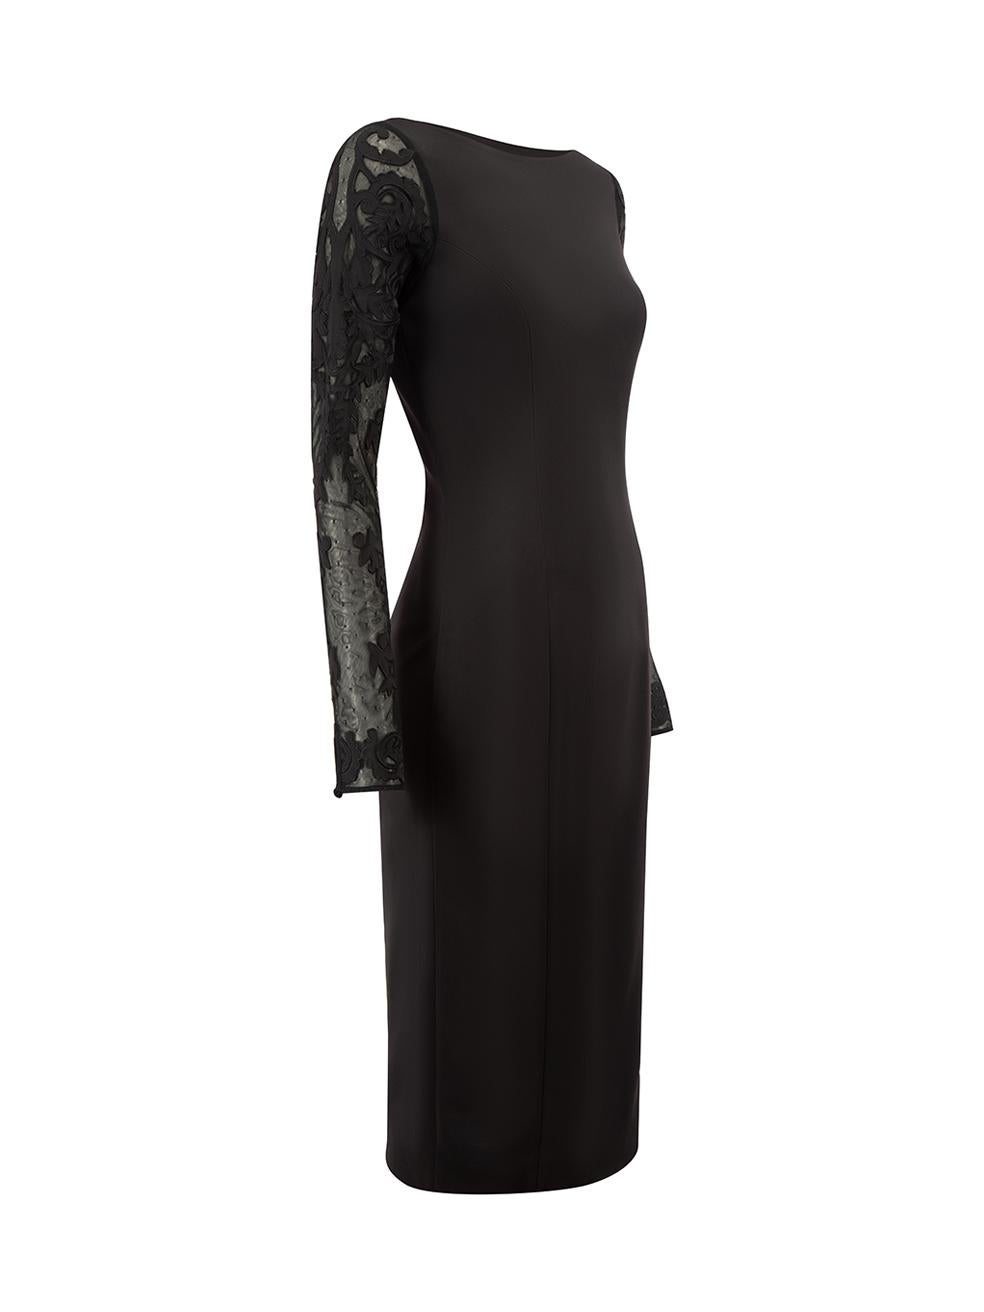 CONDITION is Very good. Minimal wear to dress is evident. Minor loose threads to cuffs on this used Temperley London designer resale item. 



Details


Black

Synthetic

Knee length dress

Sheer lace long sleeves and back panel

Round